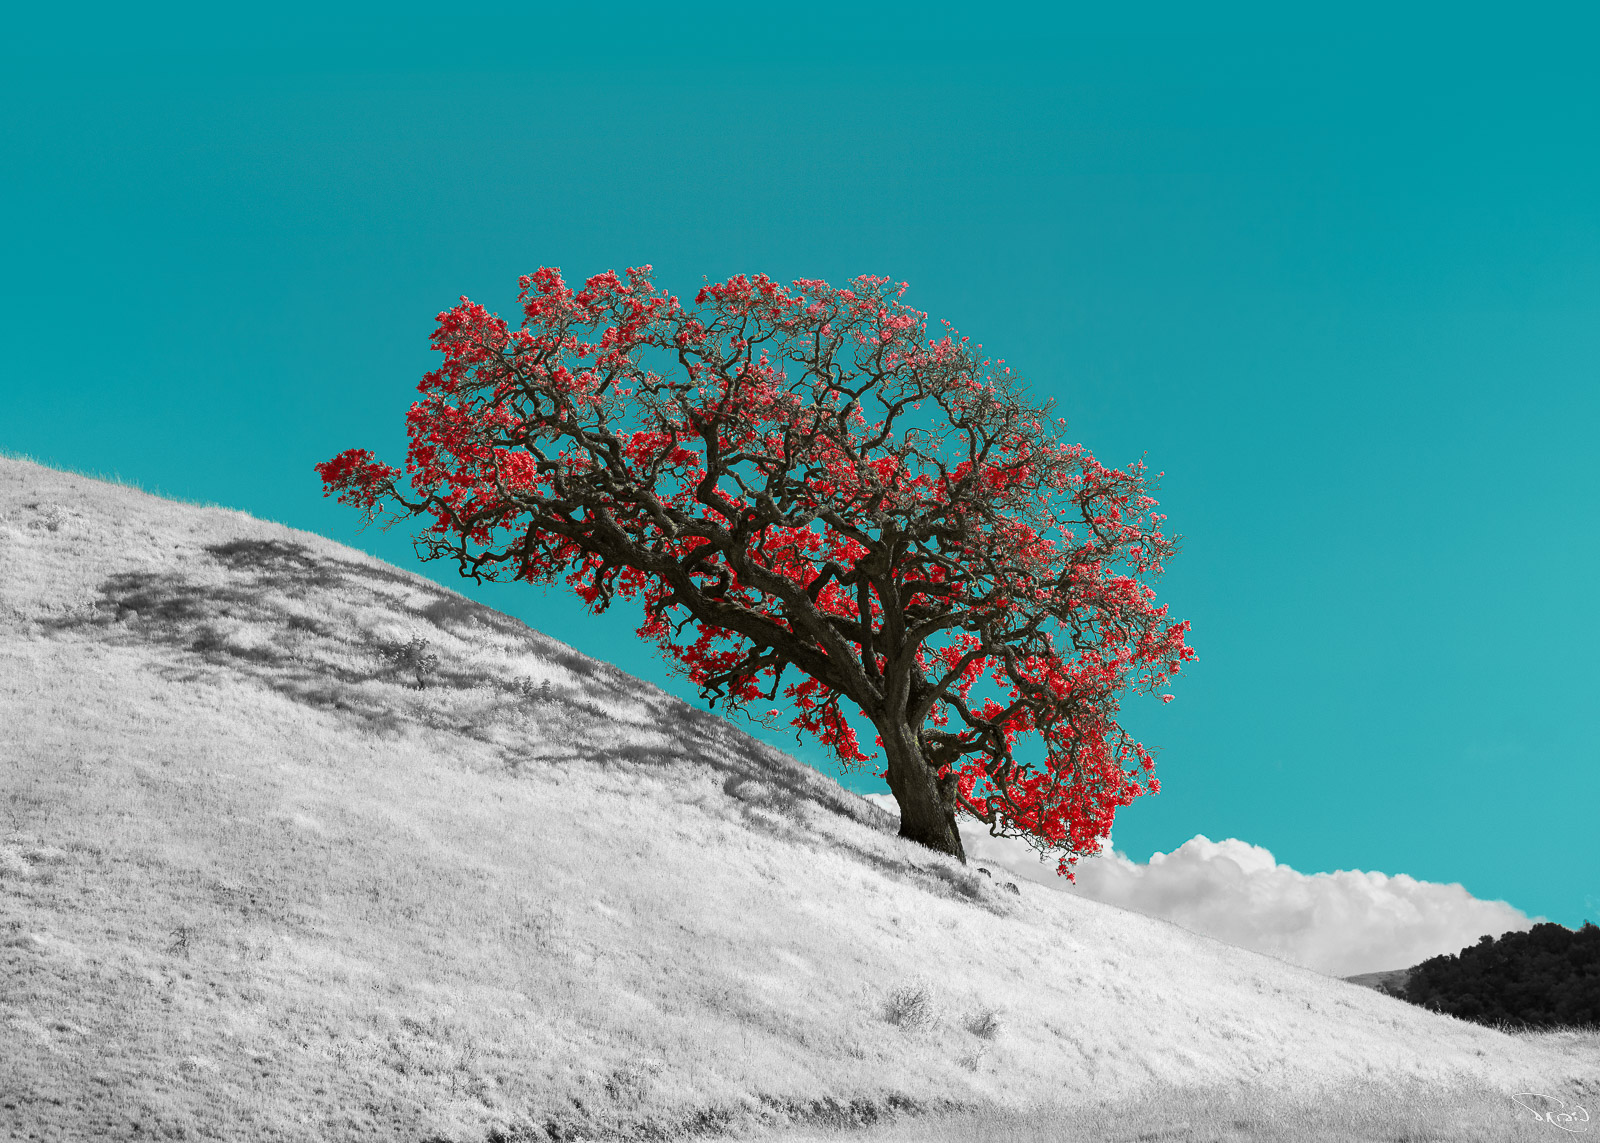 A bright red oak tree spreads its branches parallel to the steep hill on which it lives. The grass is snow white and the sky is electric blue.